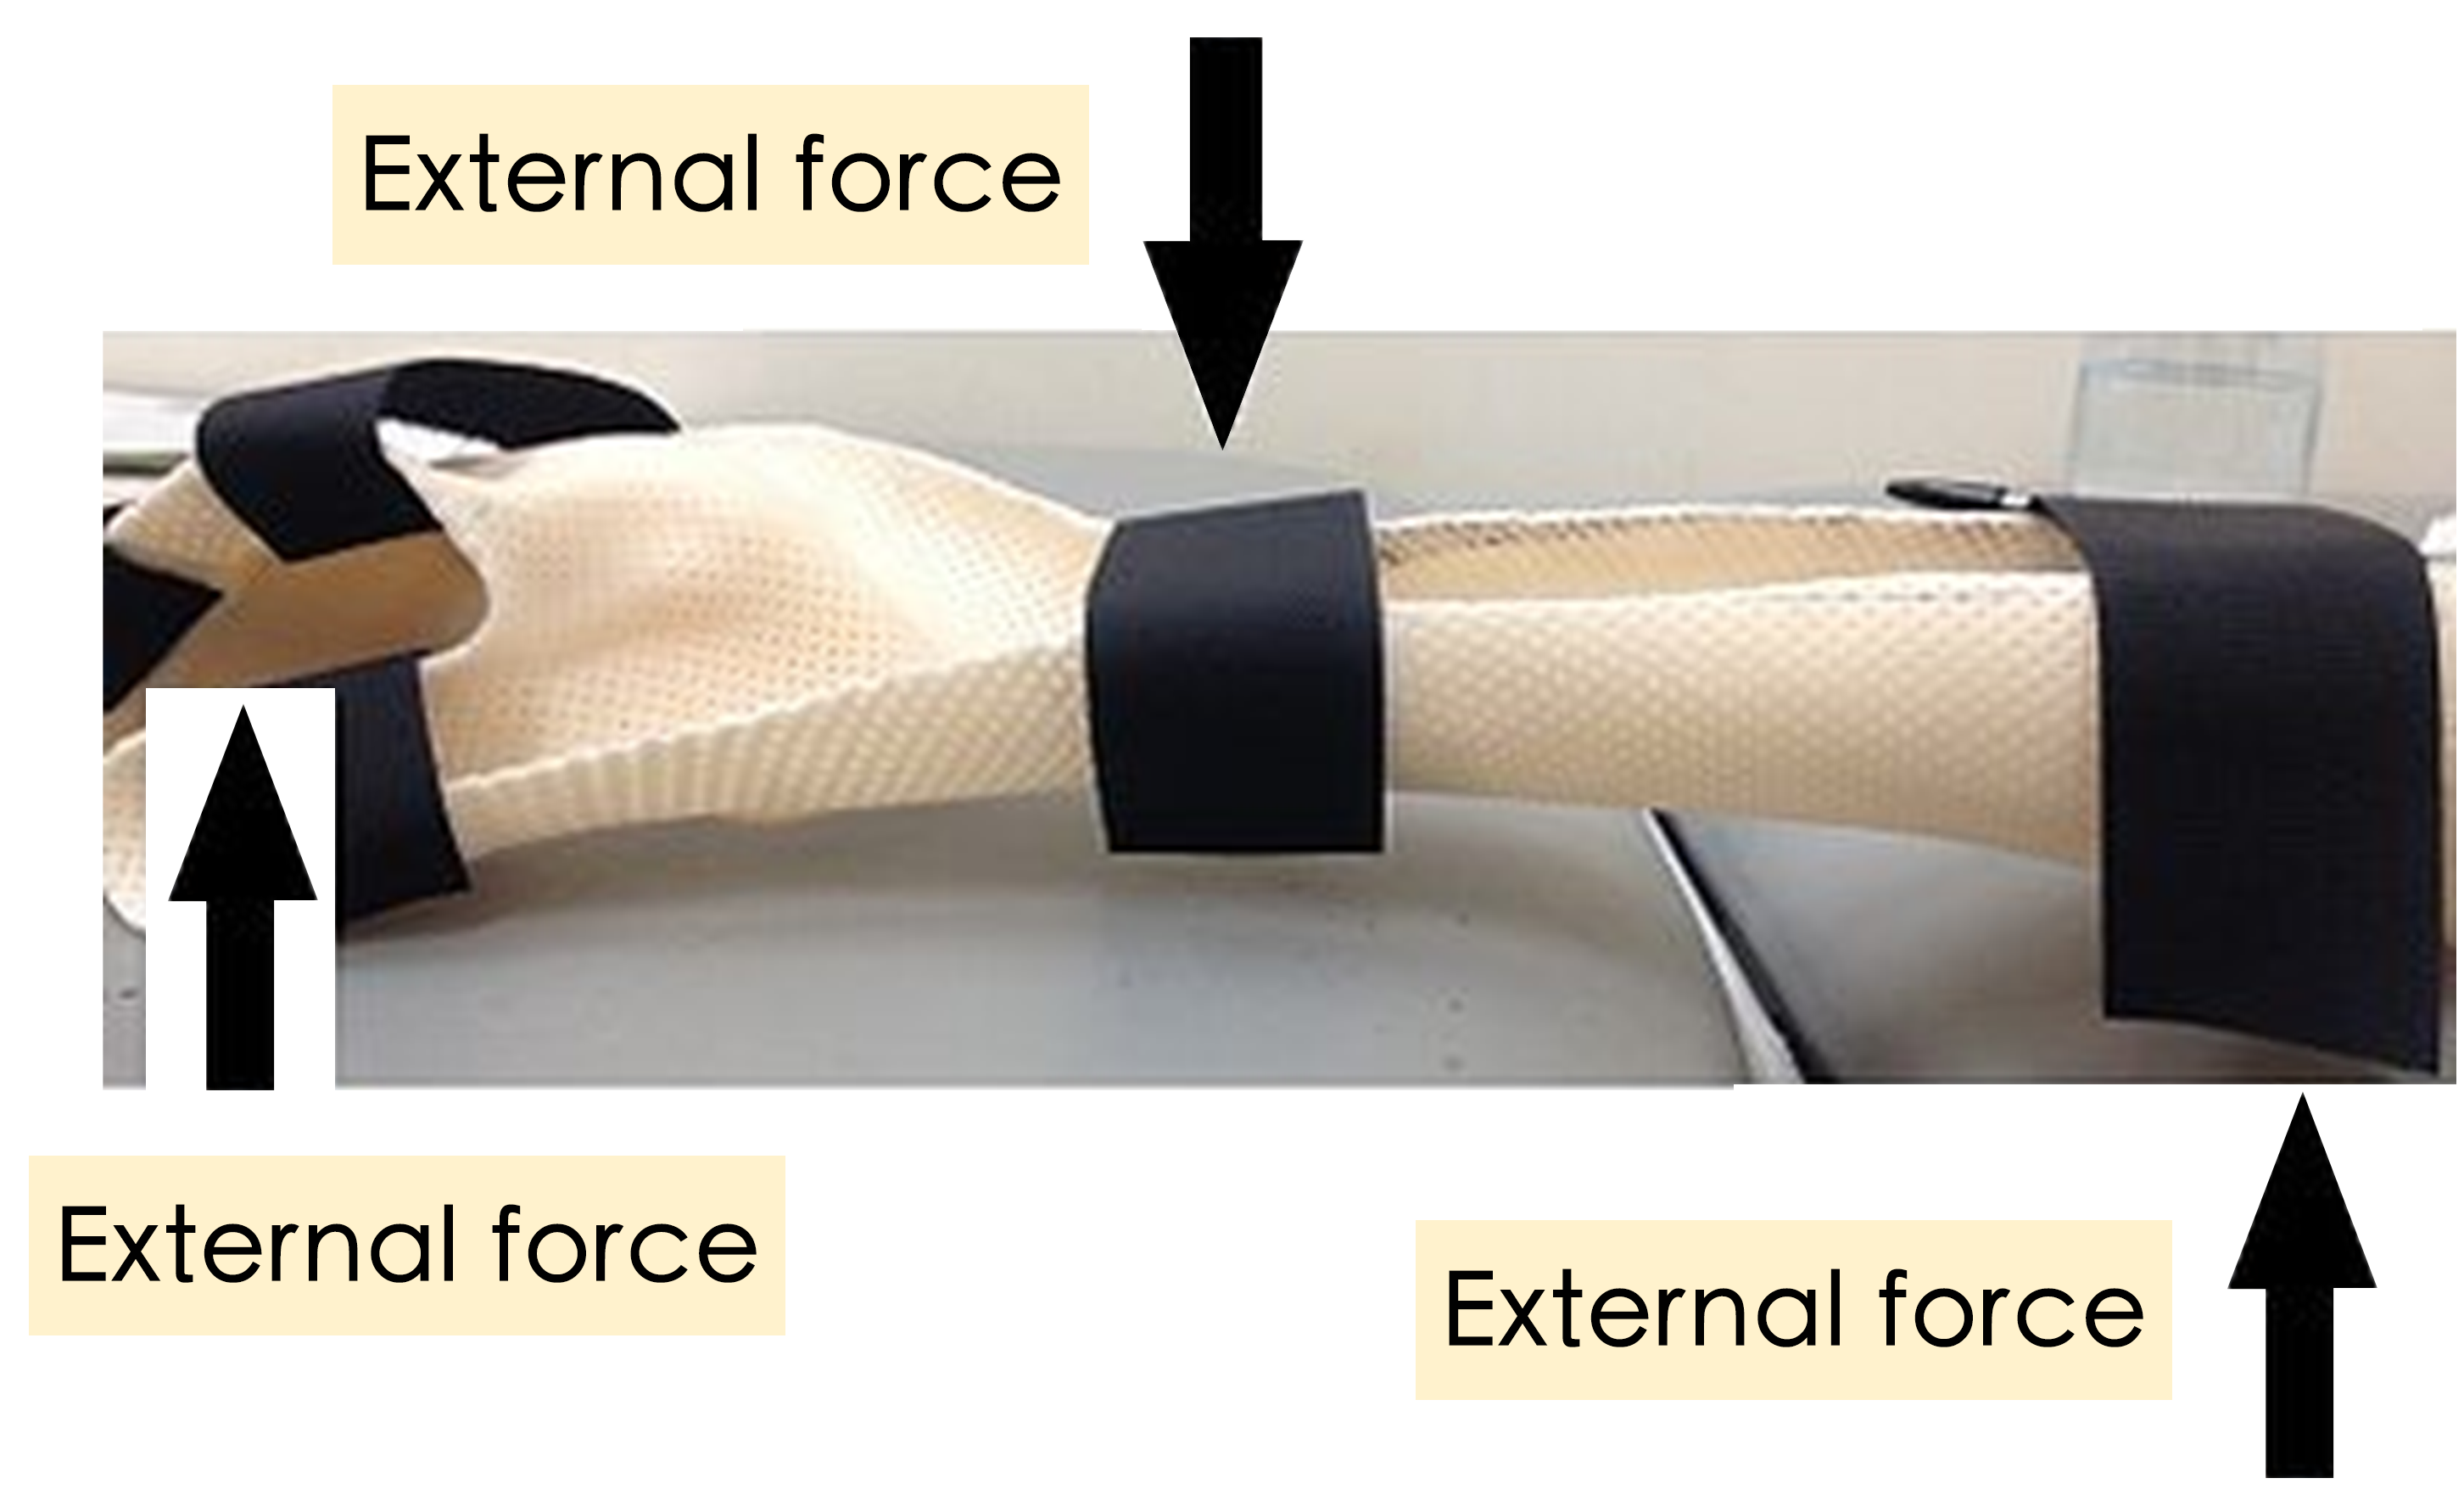 A right hand static splint and illustrate the “external traction” mechanical principle